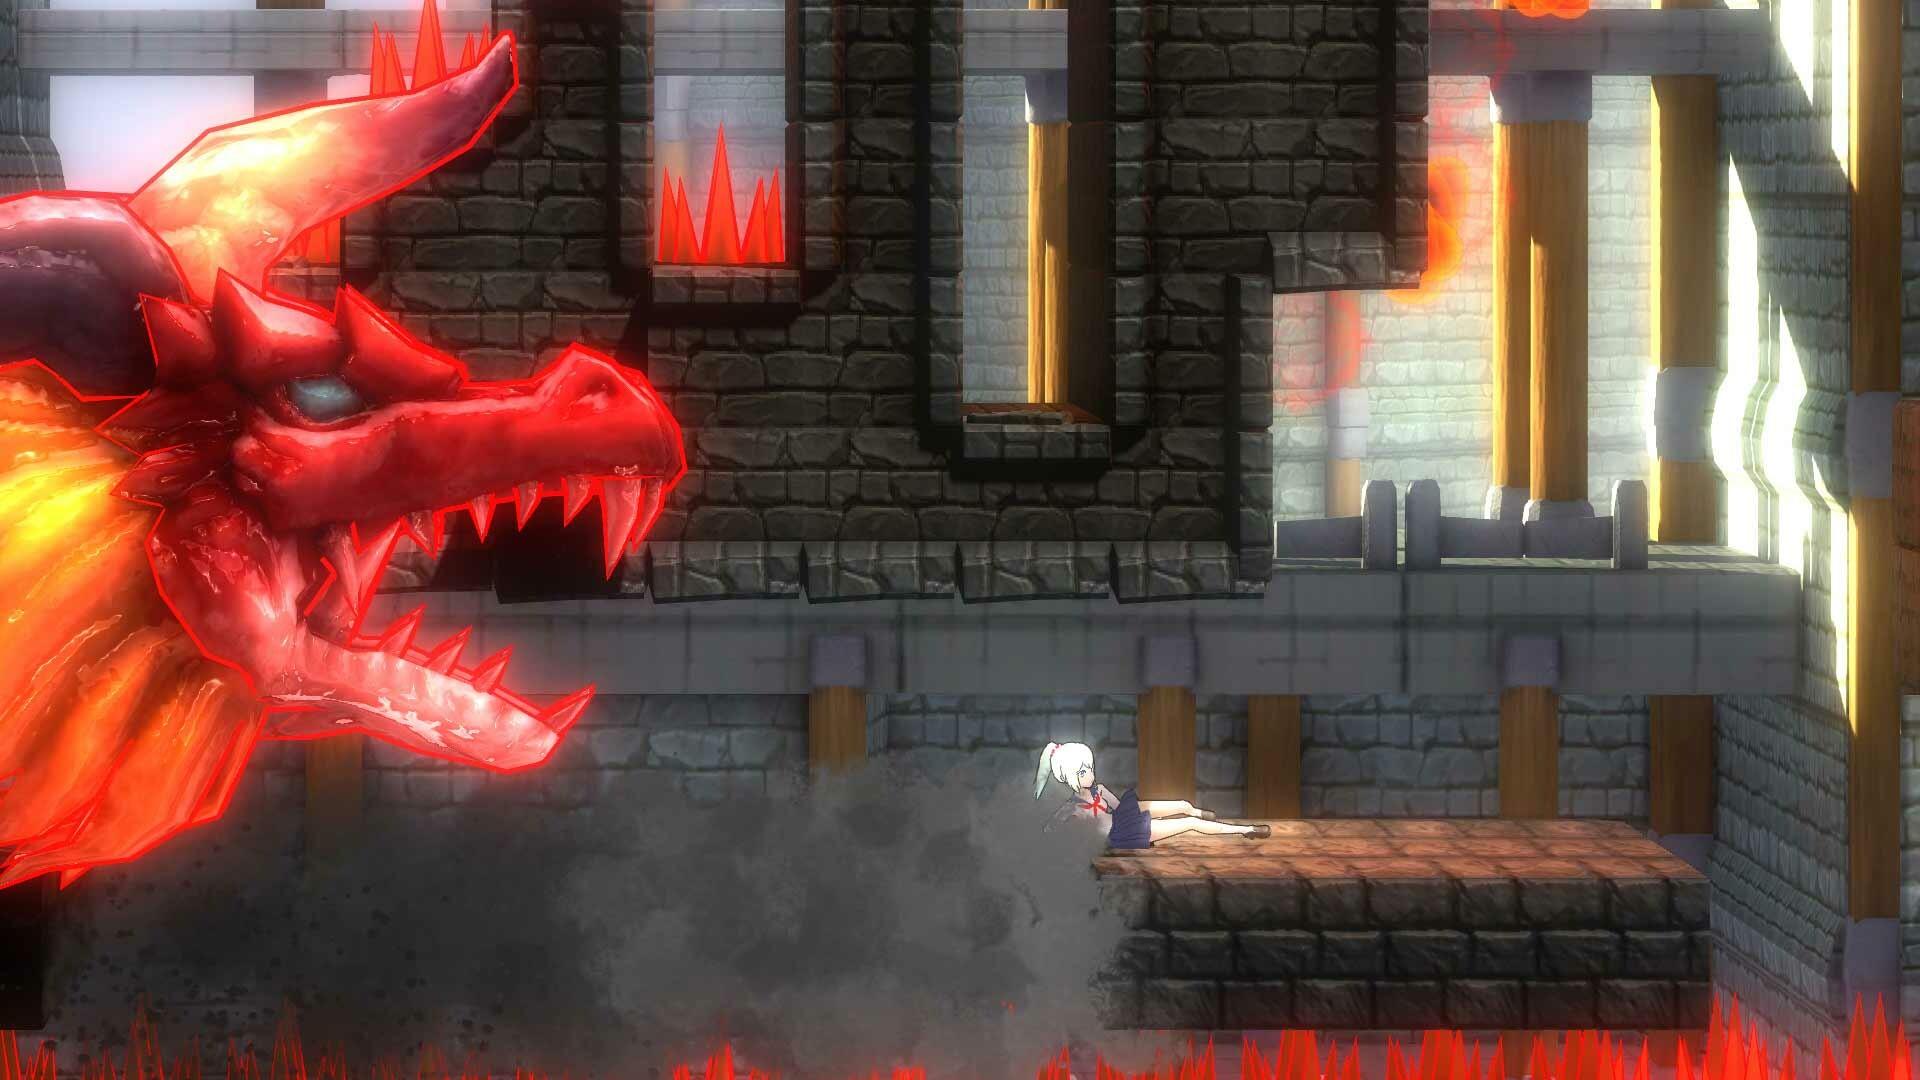 Screenshot 1 of The shadow of the evil tower 